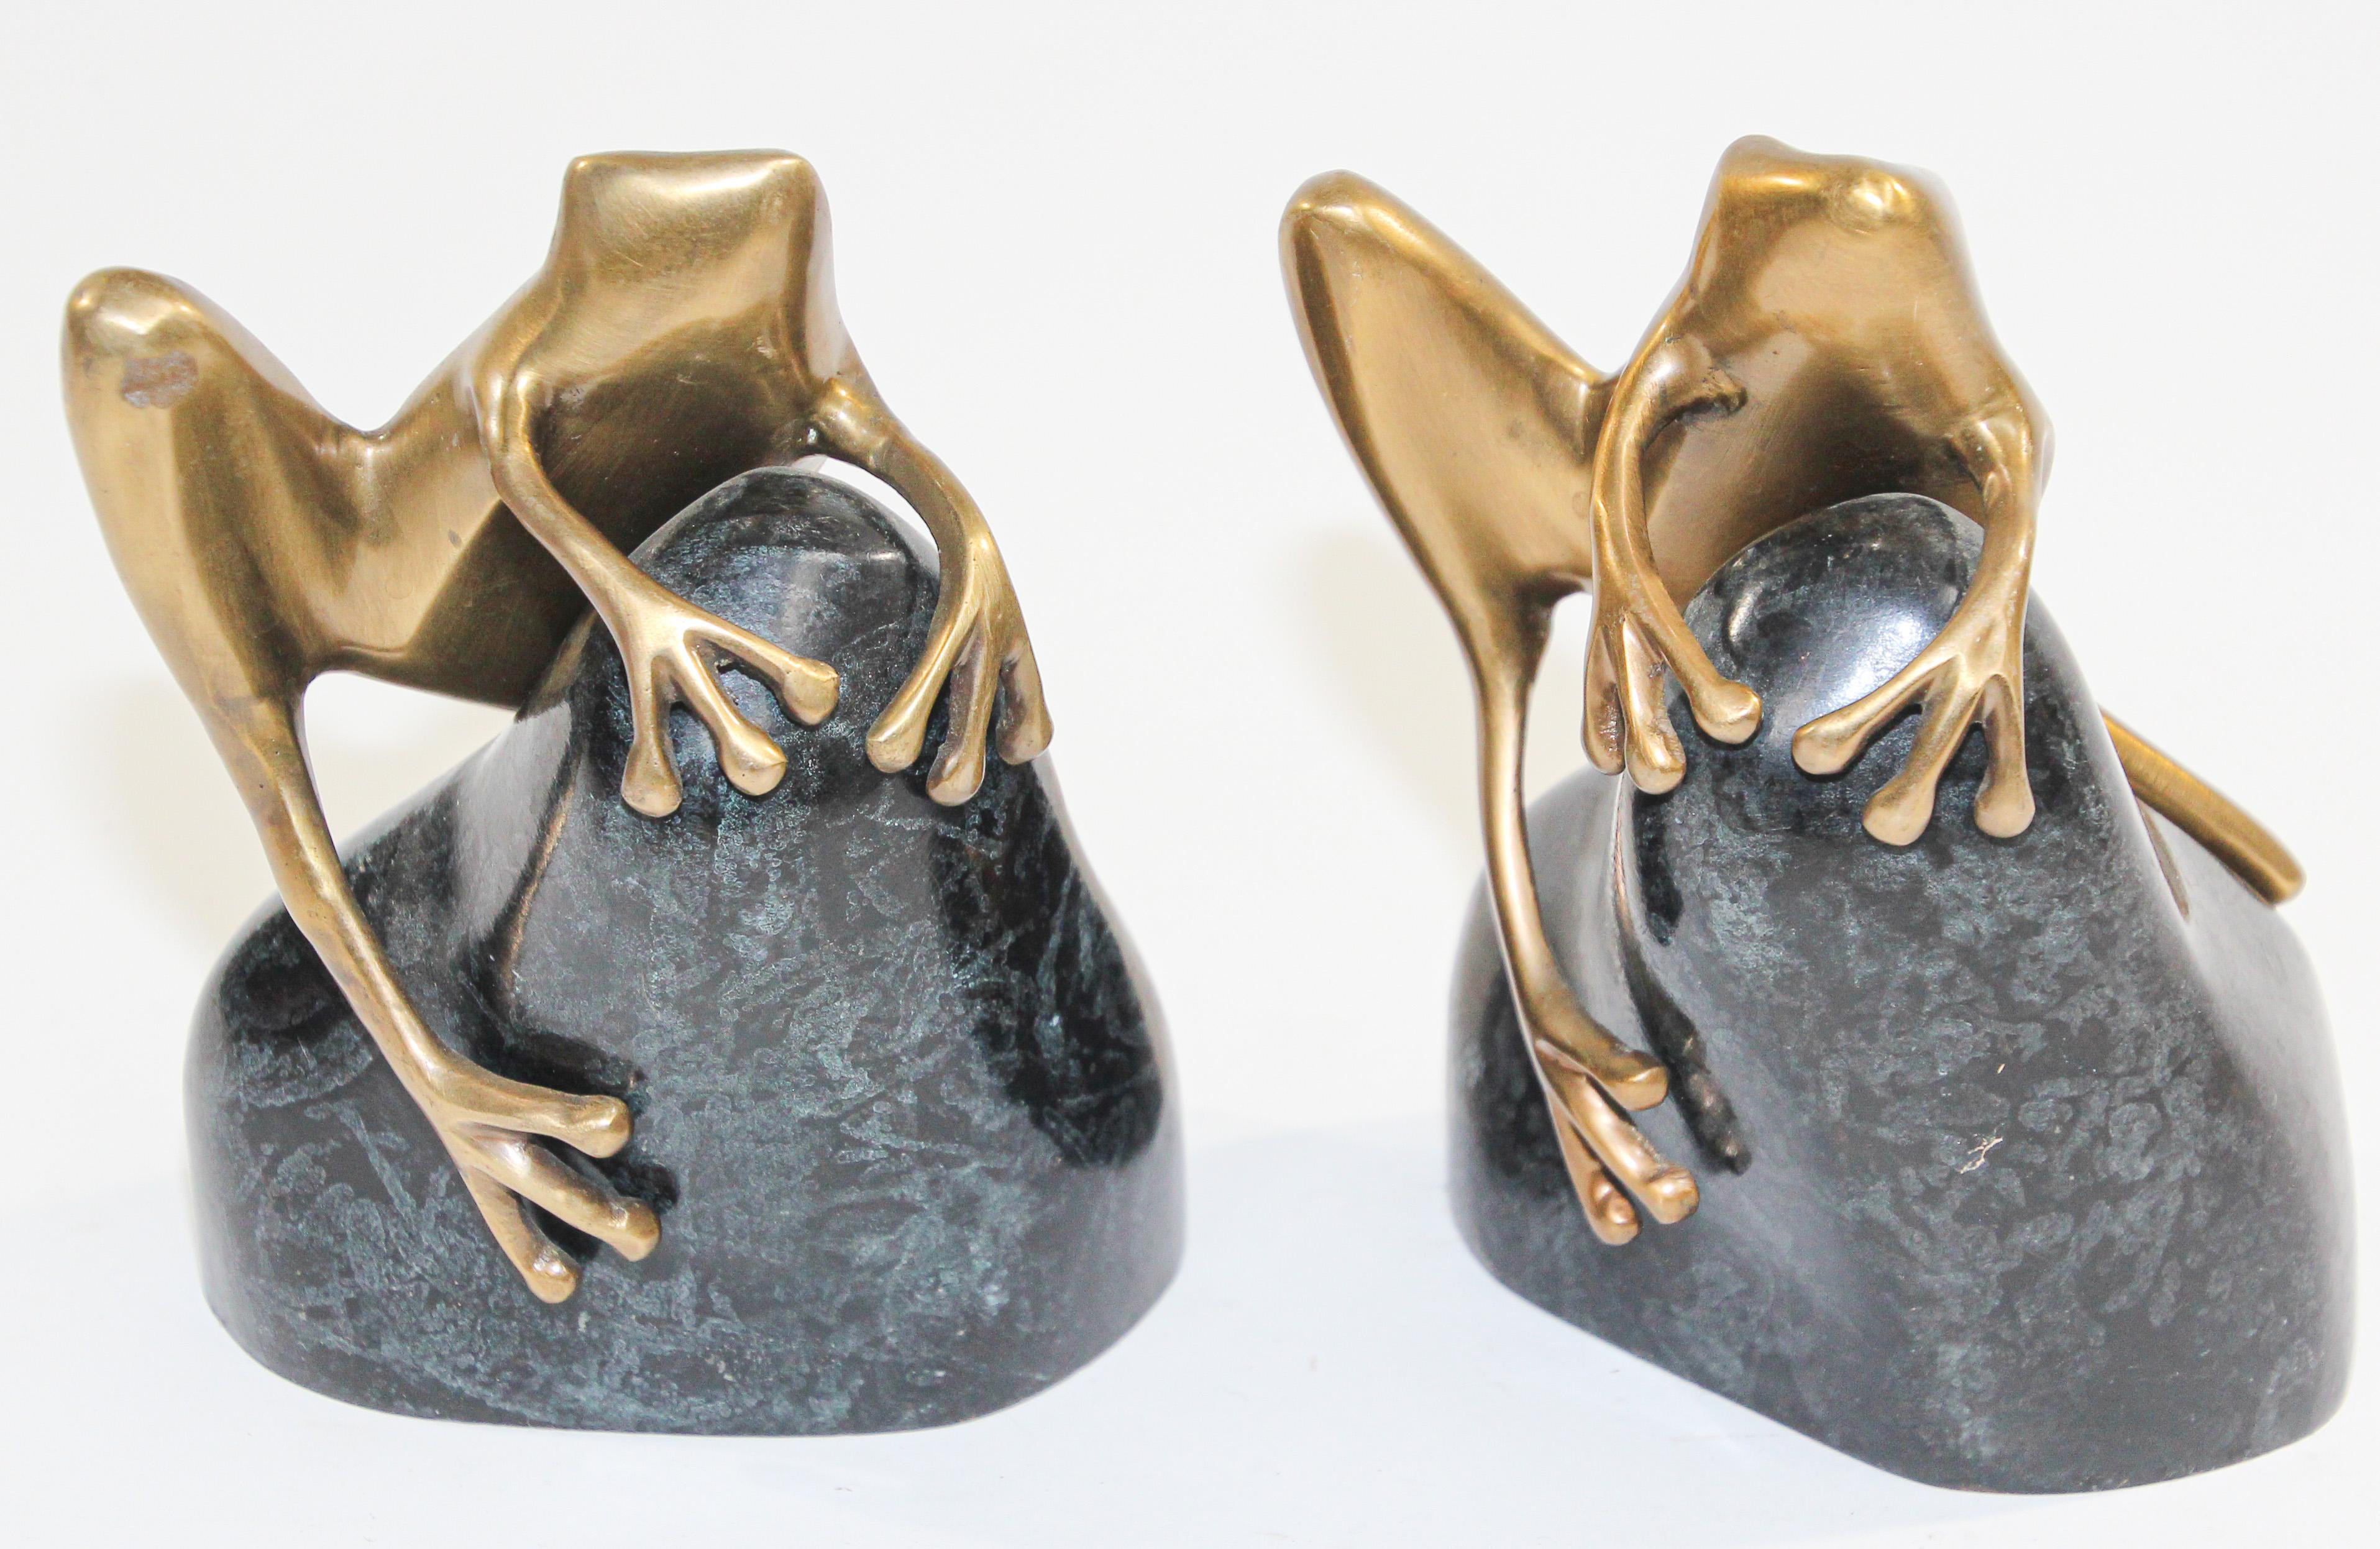 20th Century Art Deco Polished Cast Polished Brass Frogs on a Rock Bookends, circa 1940